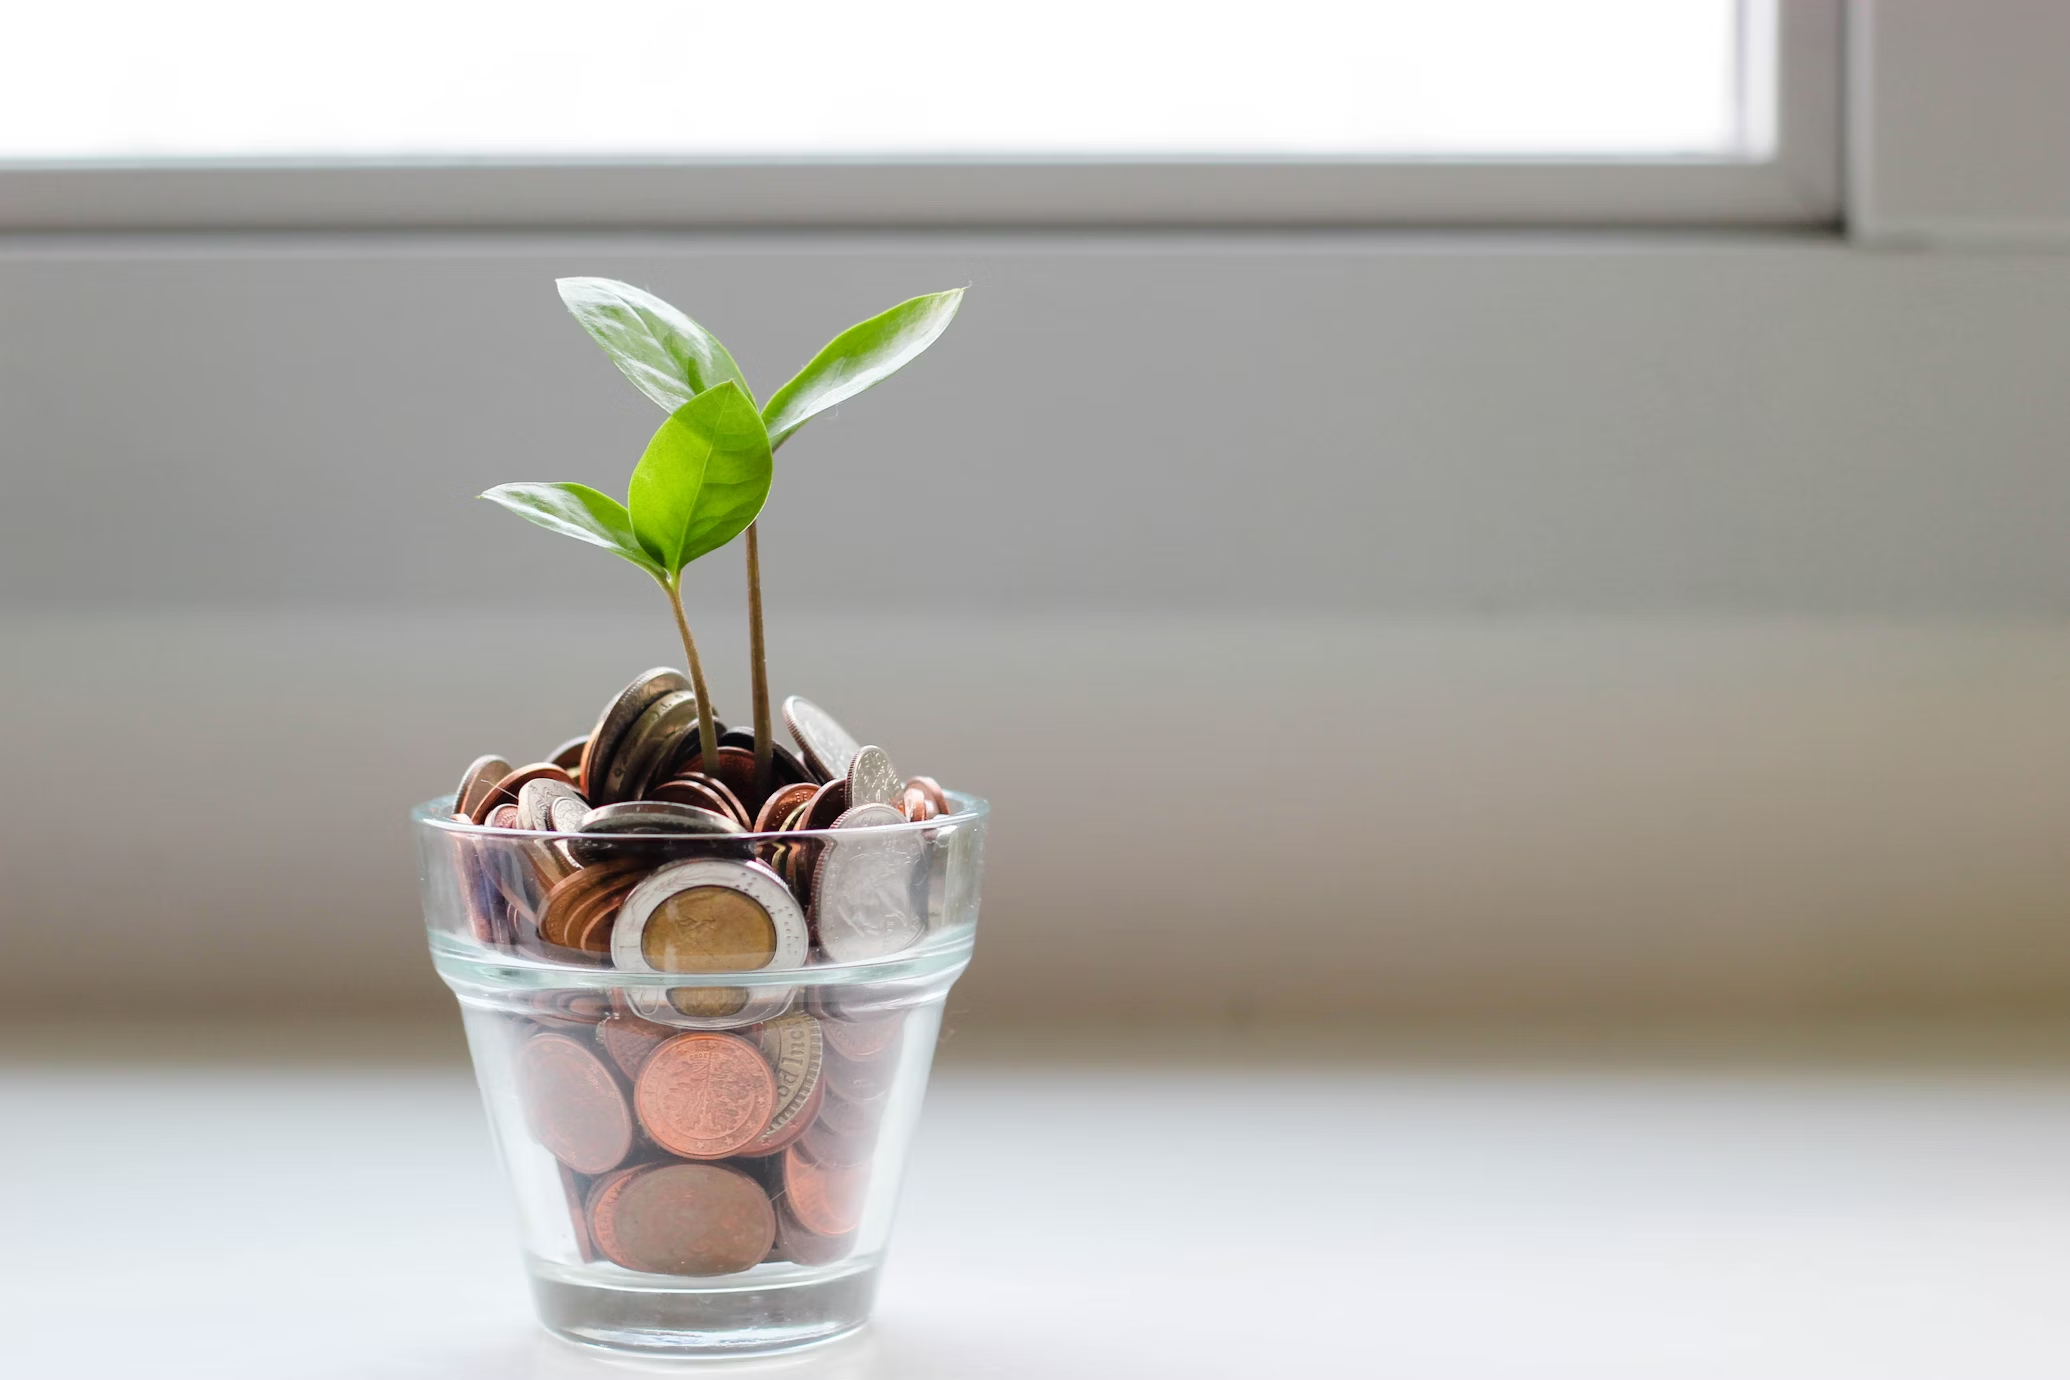 Cup of coins with plant in the middle 